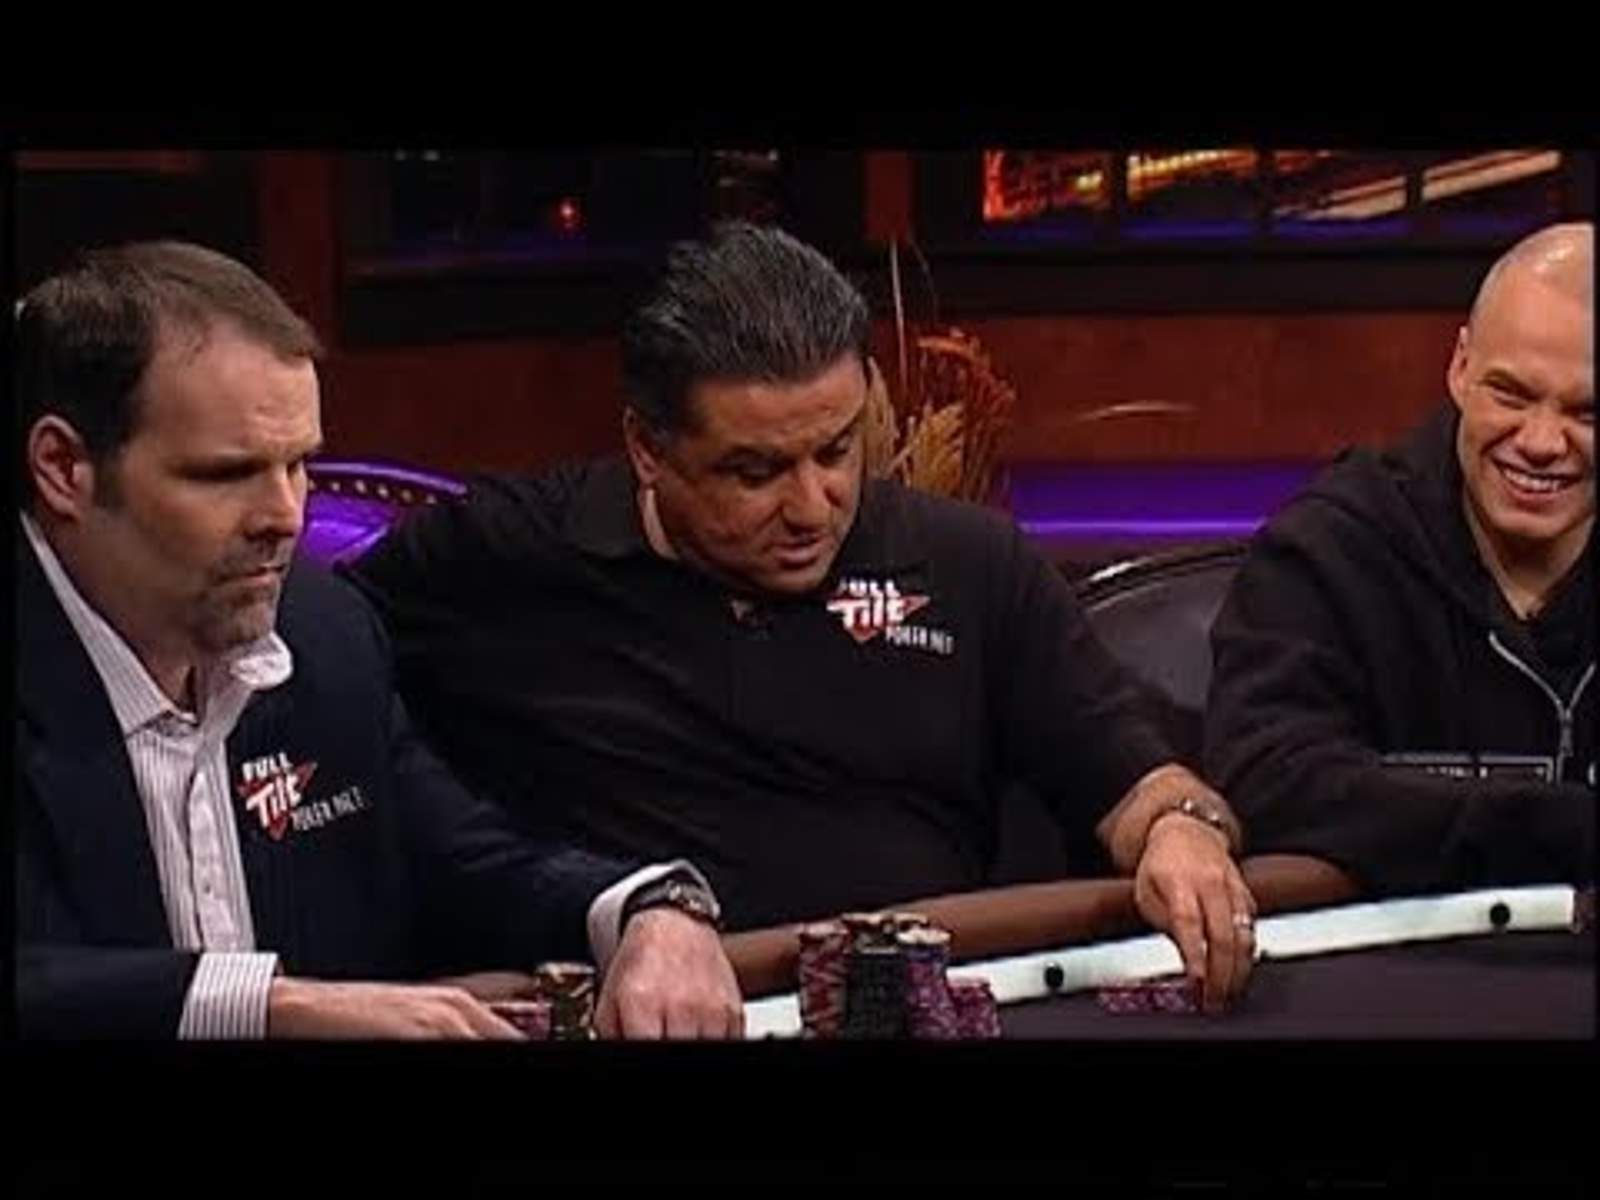 Phil Ivey Leads The Top Guns Cash Game on PokerGO